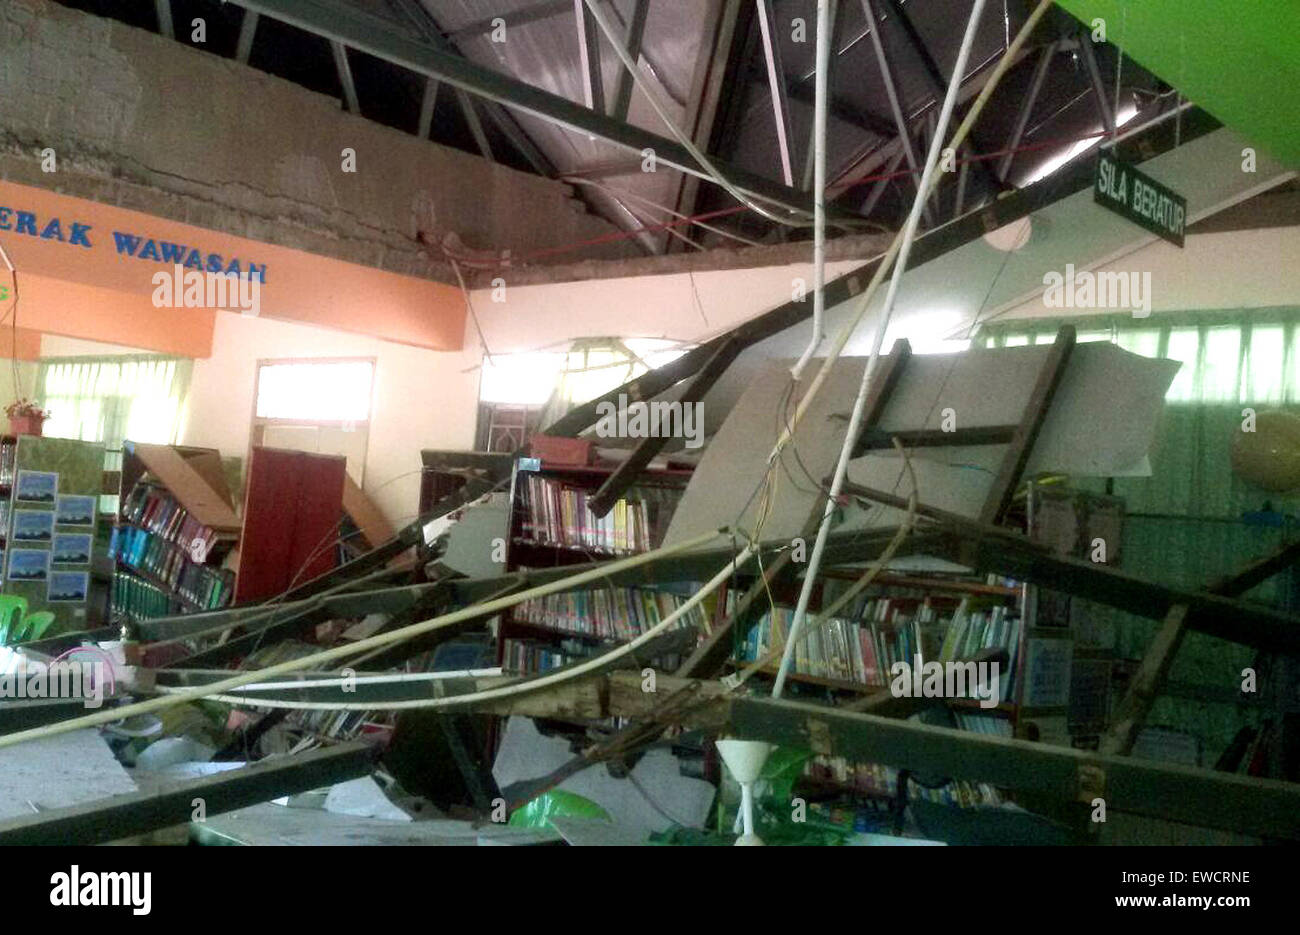 (150623) -- SABAH (MALAYSIA), June 23, 2015 (Xinhua) -- The photo taken on June 23, 2015 shows the collapsed ceiling of a school in Sabah state of Malaysia. A 3.5-magnitude aftershock occurred here Tuesday. (Xinhua/Stringer) (dzl) Stock Photo